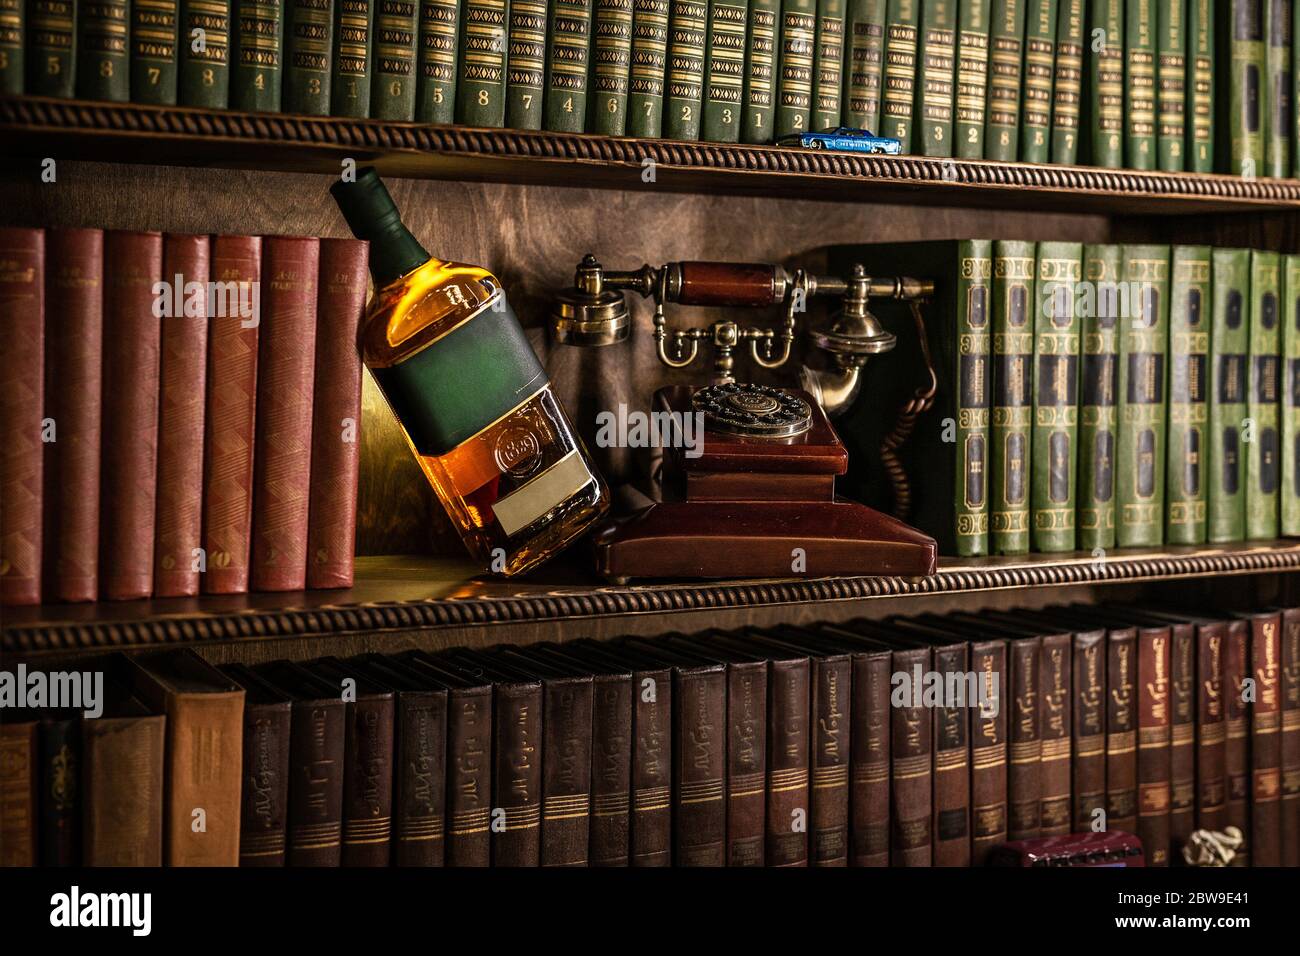 Bottle with alcohol on a background of vintage books. Old retro telephone, authentic interior Stock Photo